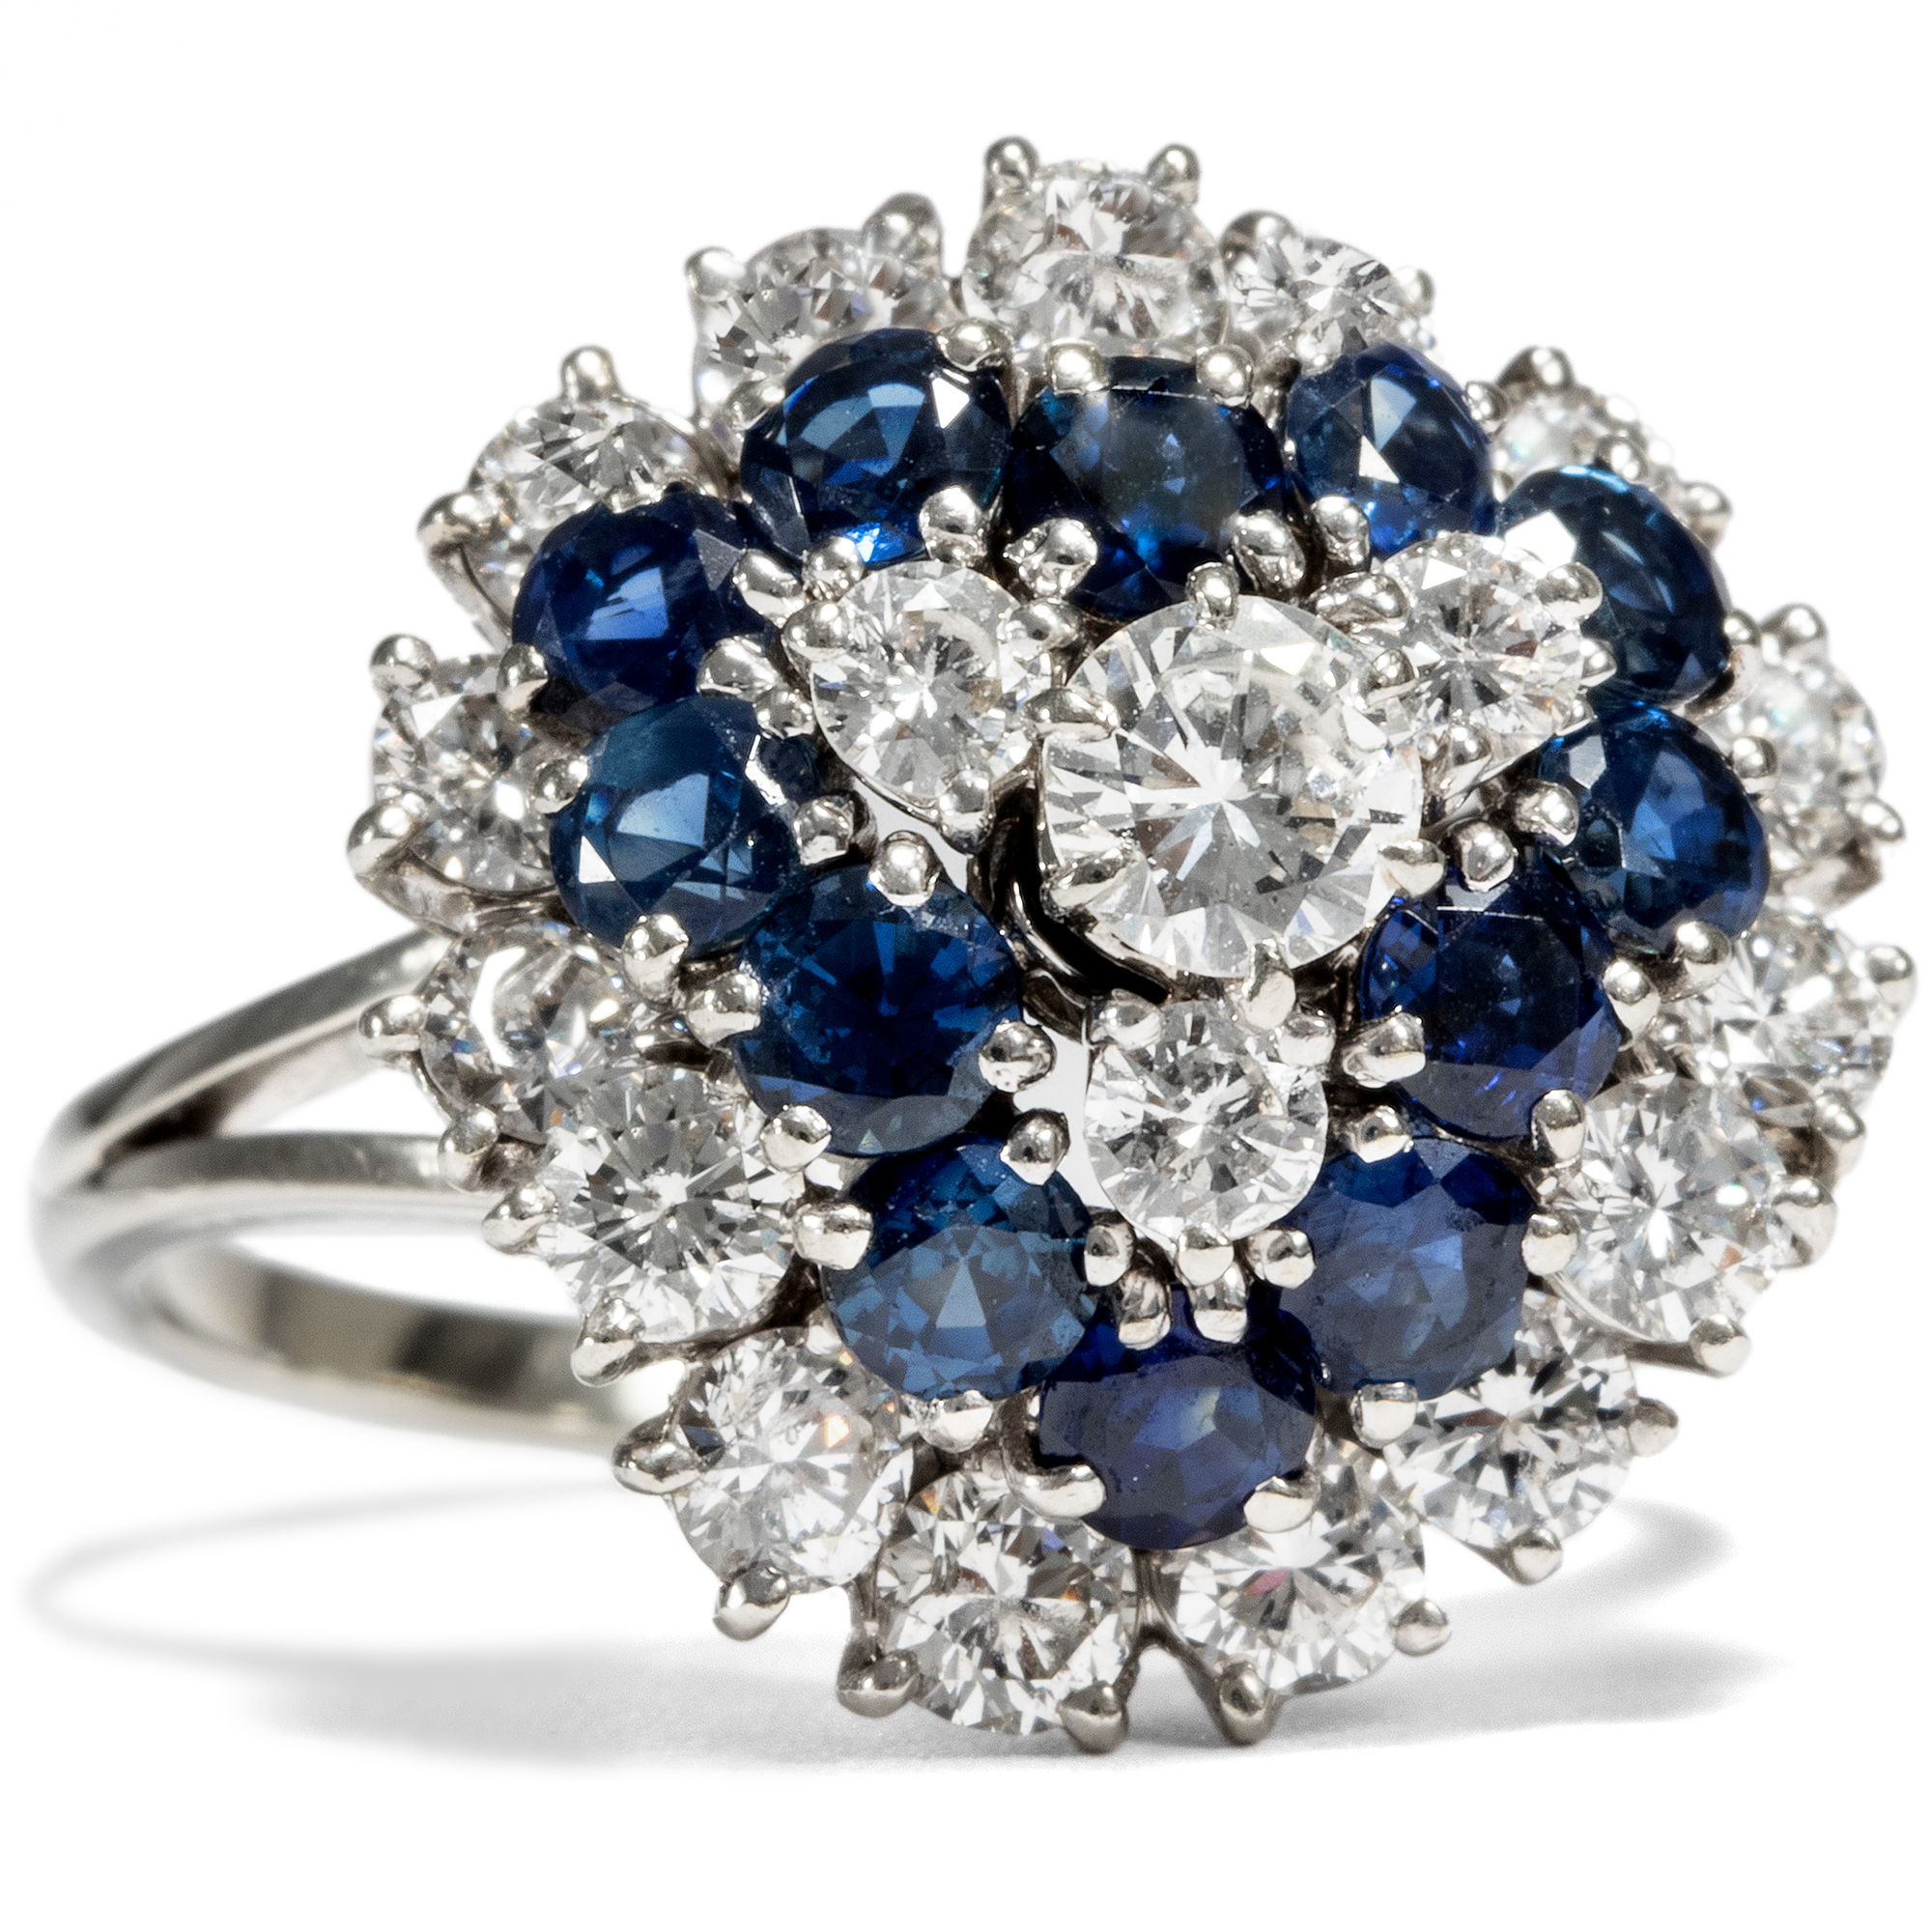 Vintage Cluster Ring With Sapphires & Diamonds in White Gold, ca. 1970